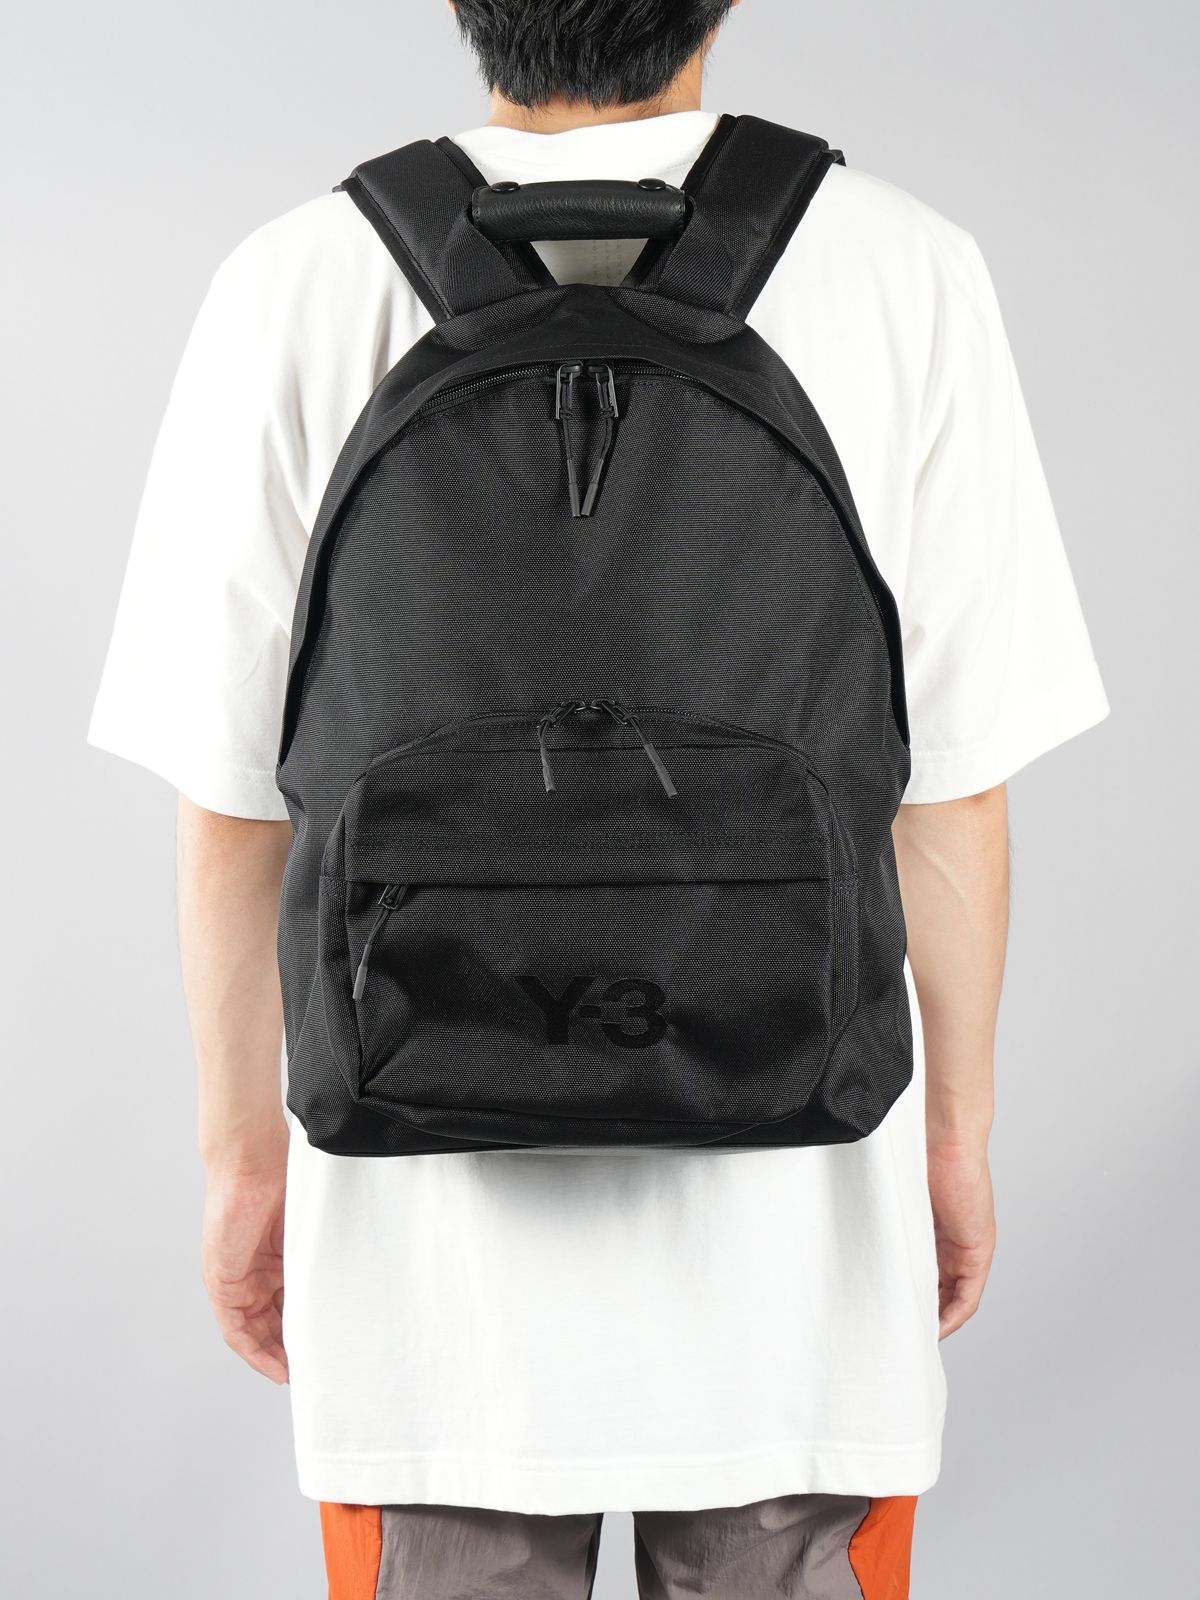 Y-3 - ラスト1点 / Y-3 CLASSIC BACK PACK / クラシックバックパック